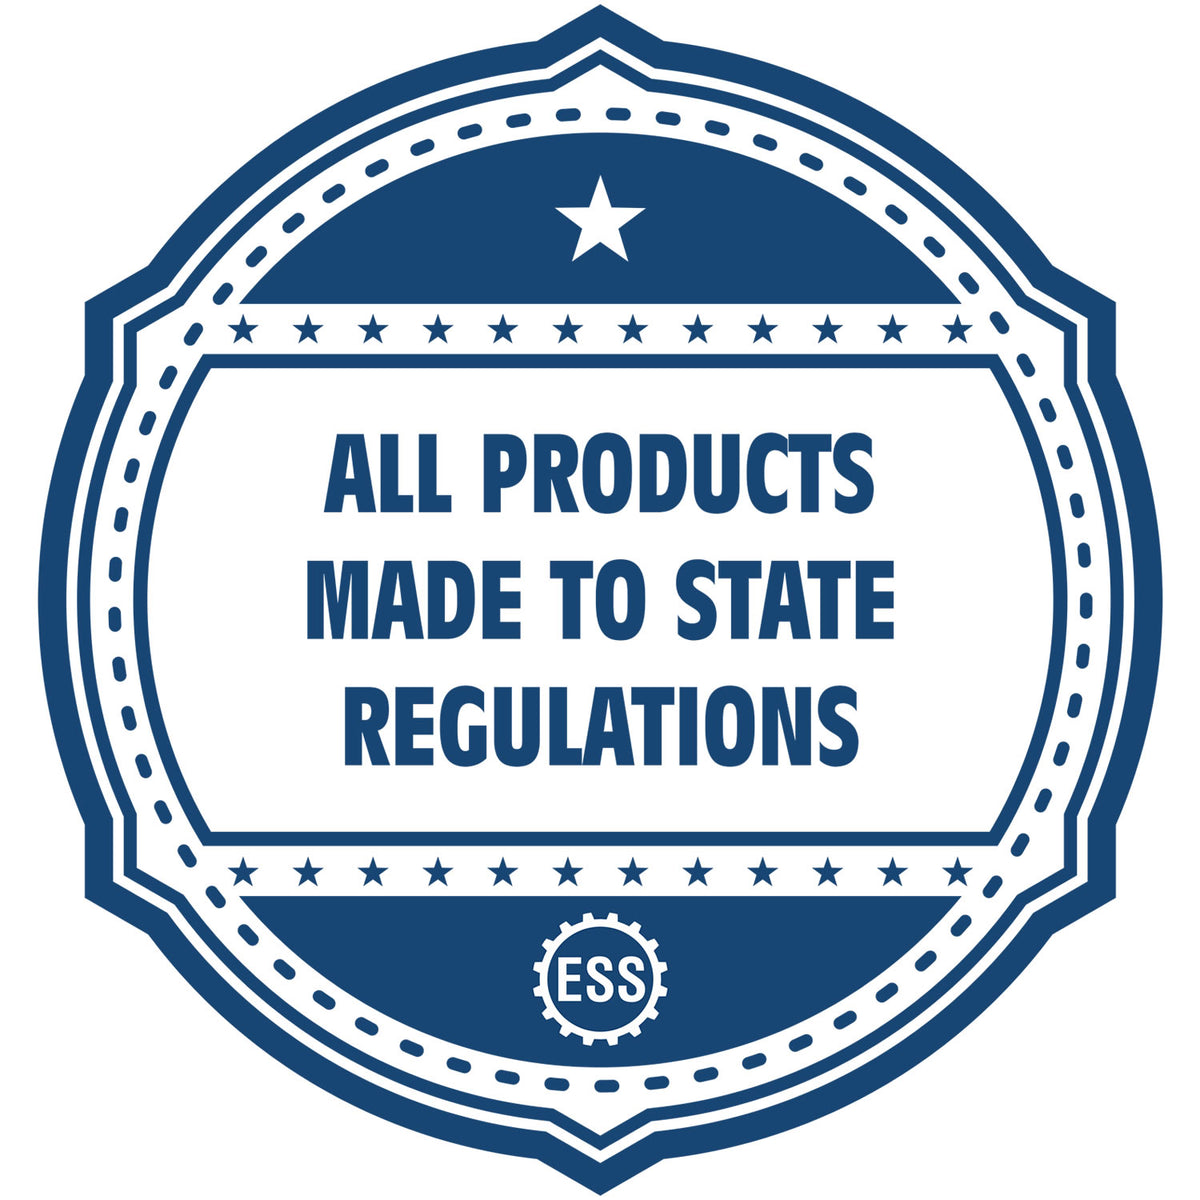 A blue icon or badge for the Gift Mississippi Land Surveyor Seal showing that this product is made in compliance with state regulations.